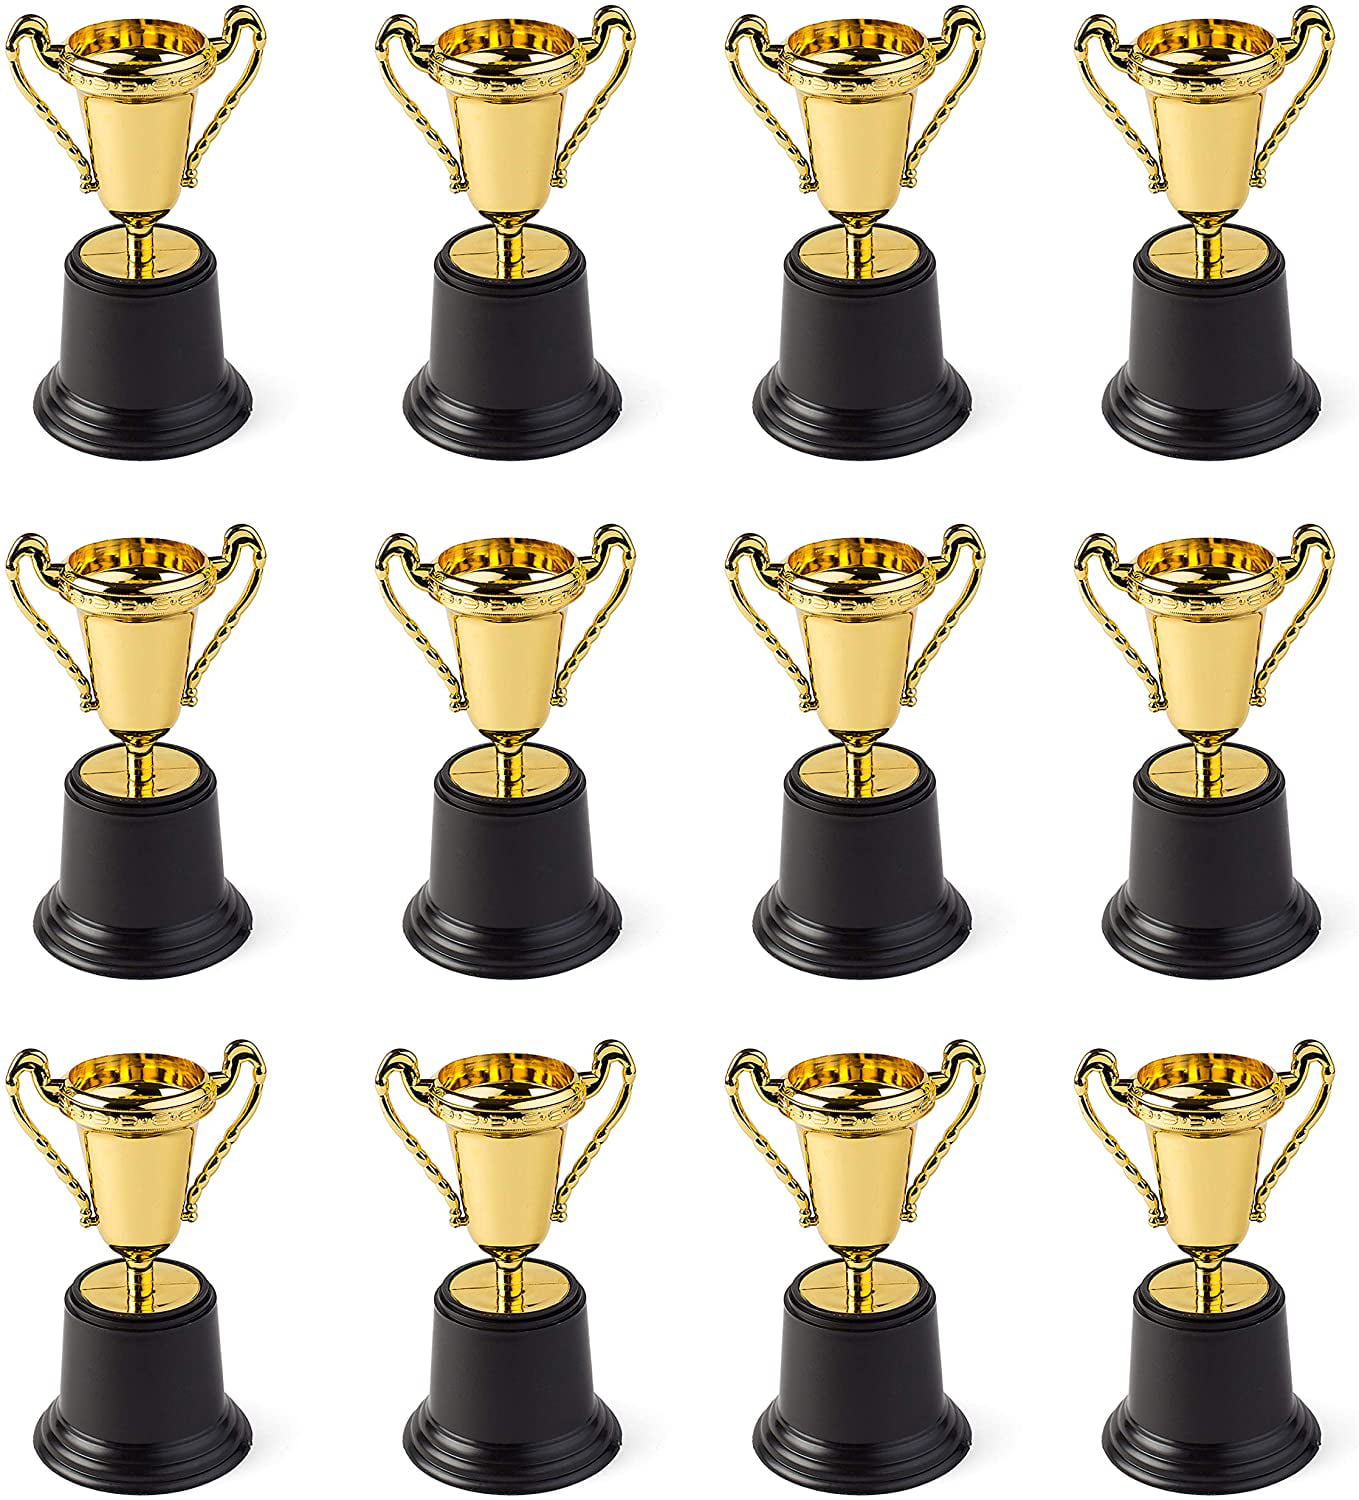 Gold and Red Star Cups Achievement Trophies Awards 4 sizes FREE Engraving 